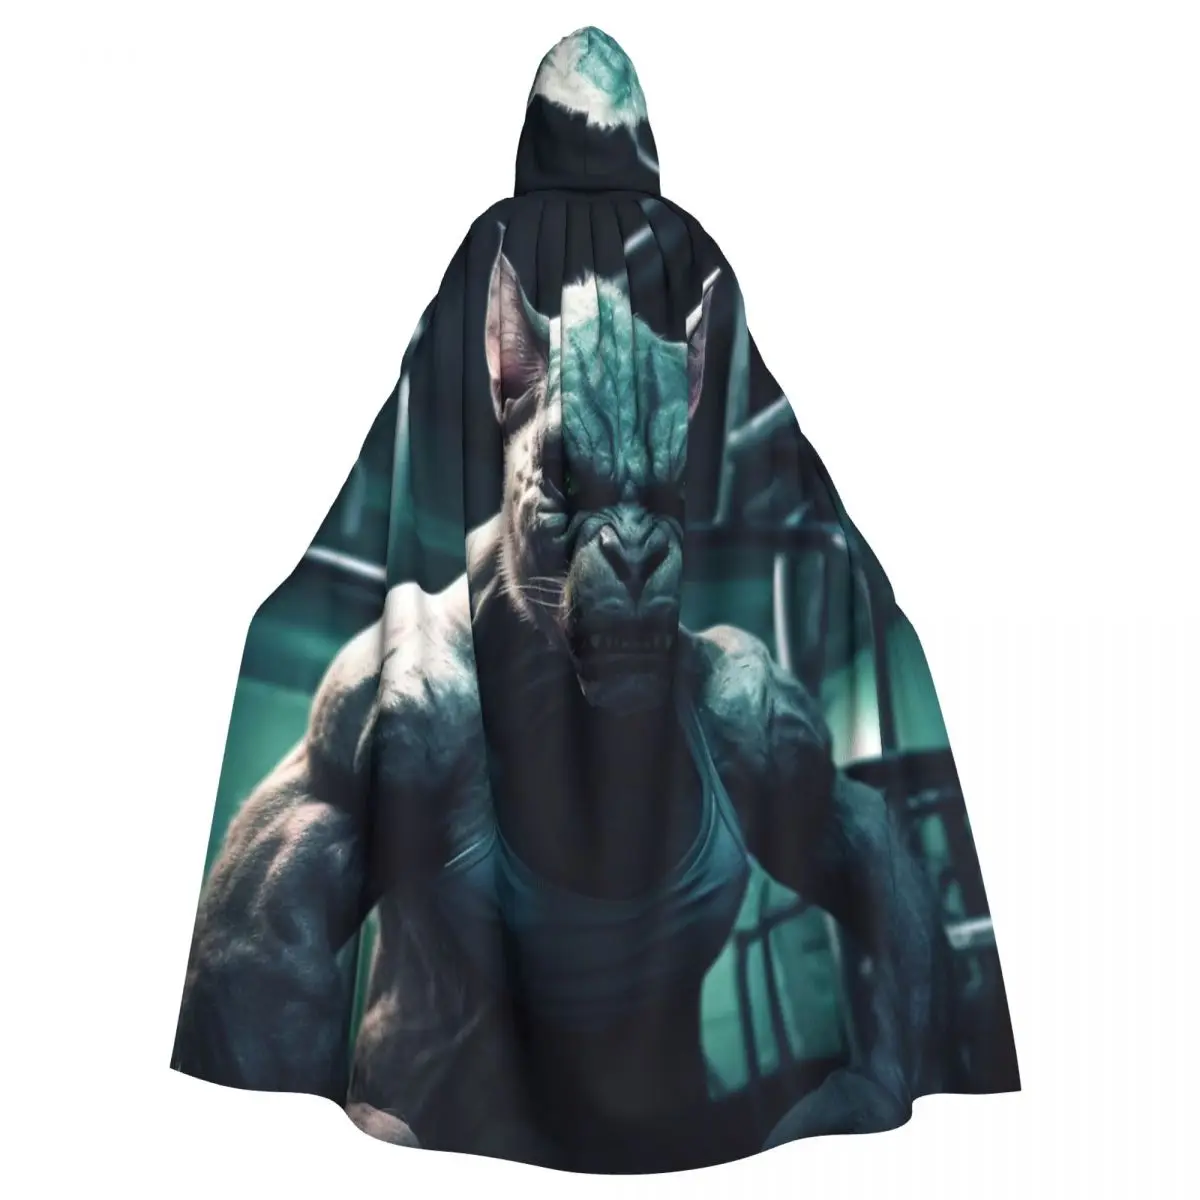 

Gym Big Scary Ugly Cat Miaw Hooded Cloak Halloween Party Cosplay Woman Men Adult Long Witchcraft Robe Hood